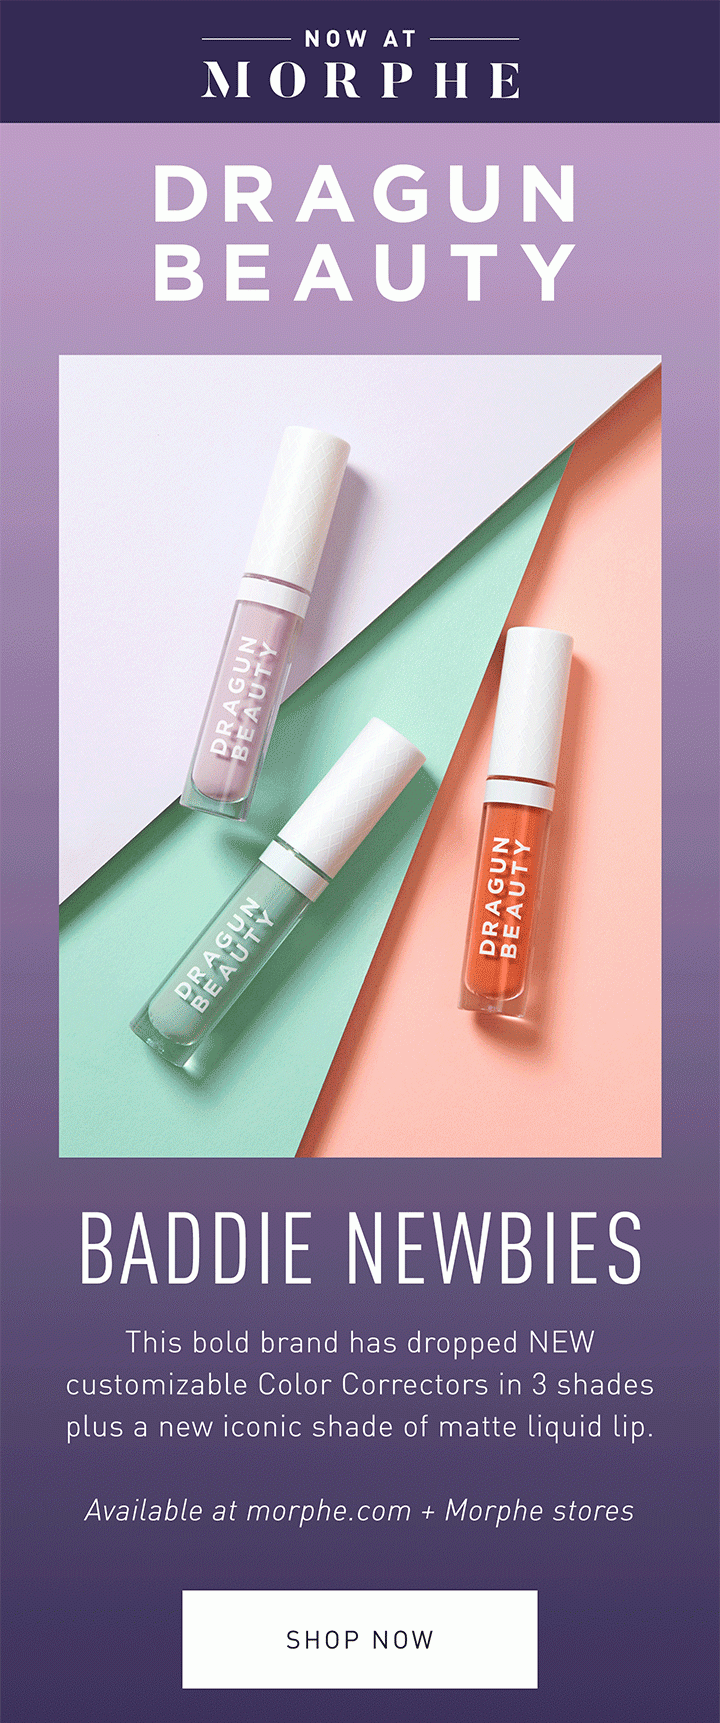 NOW AT MORPHE DRAGUN BEAUTY BADDIE NEWBIES This bold brand has dropped NEW customizable Color Correctors in 3 shades plus a new iconic shade of matte liquid lip. Available at morphe.com + Morphe stores SHOP NOW 